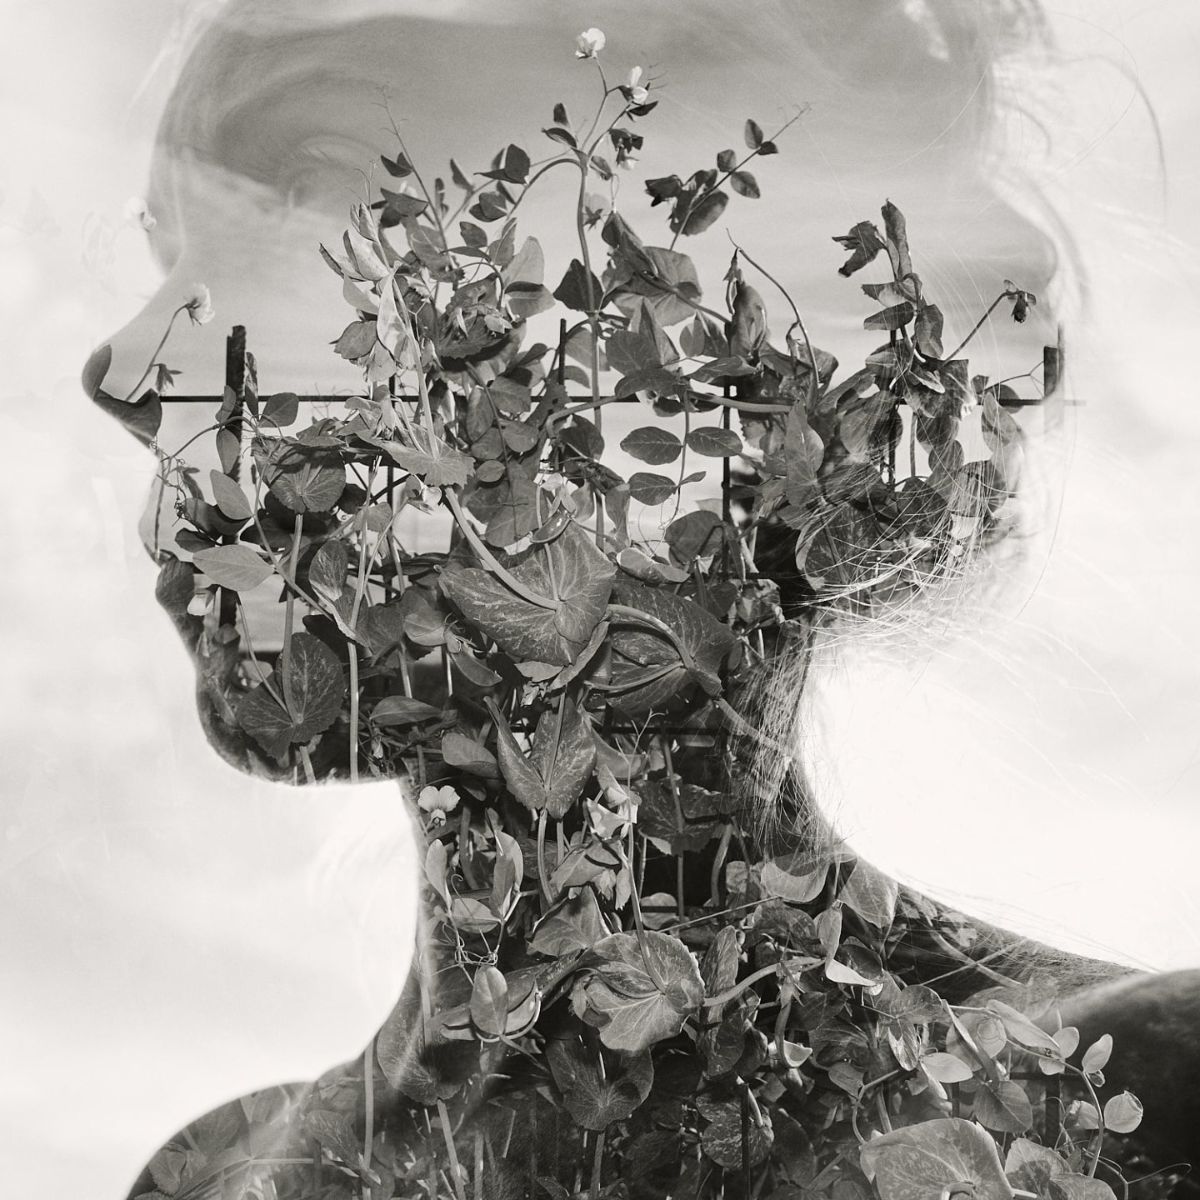 christoffer-relanders-double-exposure-pictures-embody-nature-scenes-onto-human-figures-featured